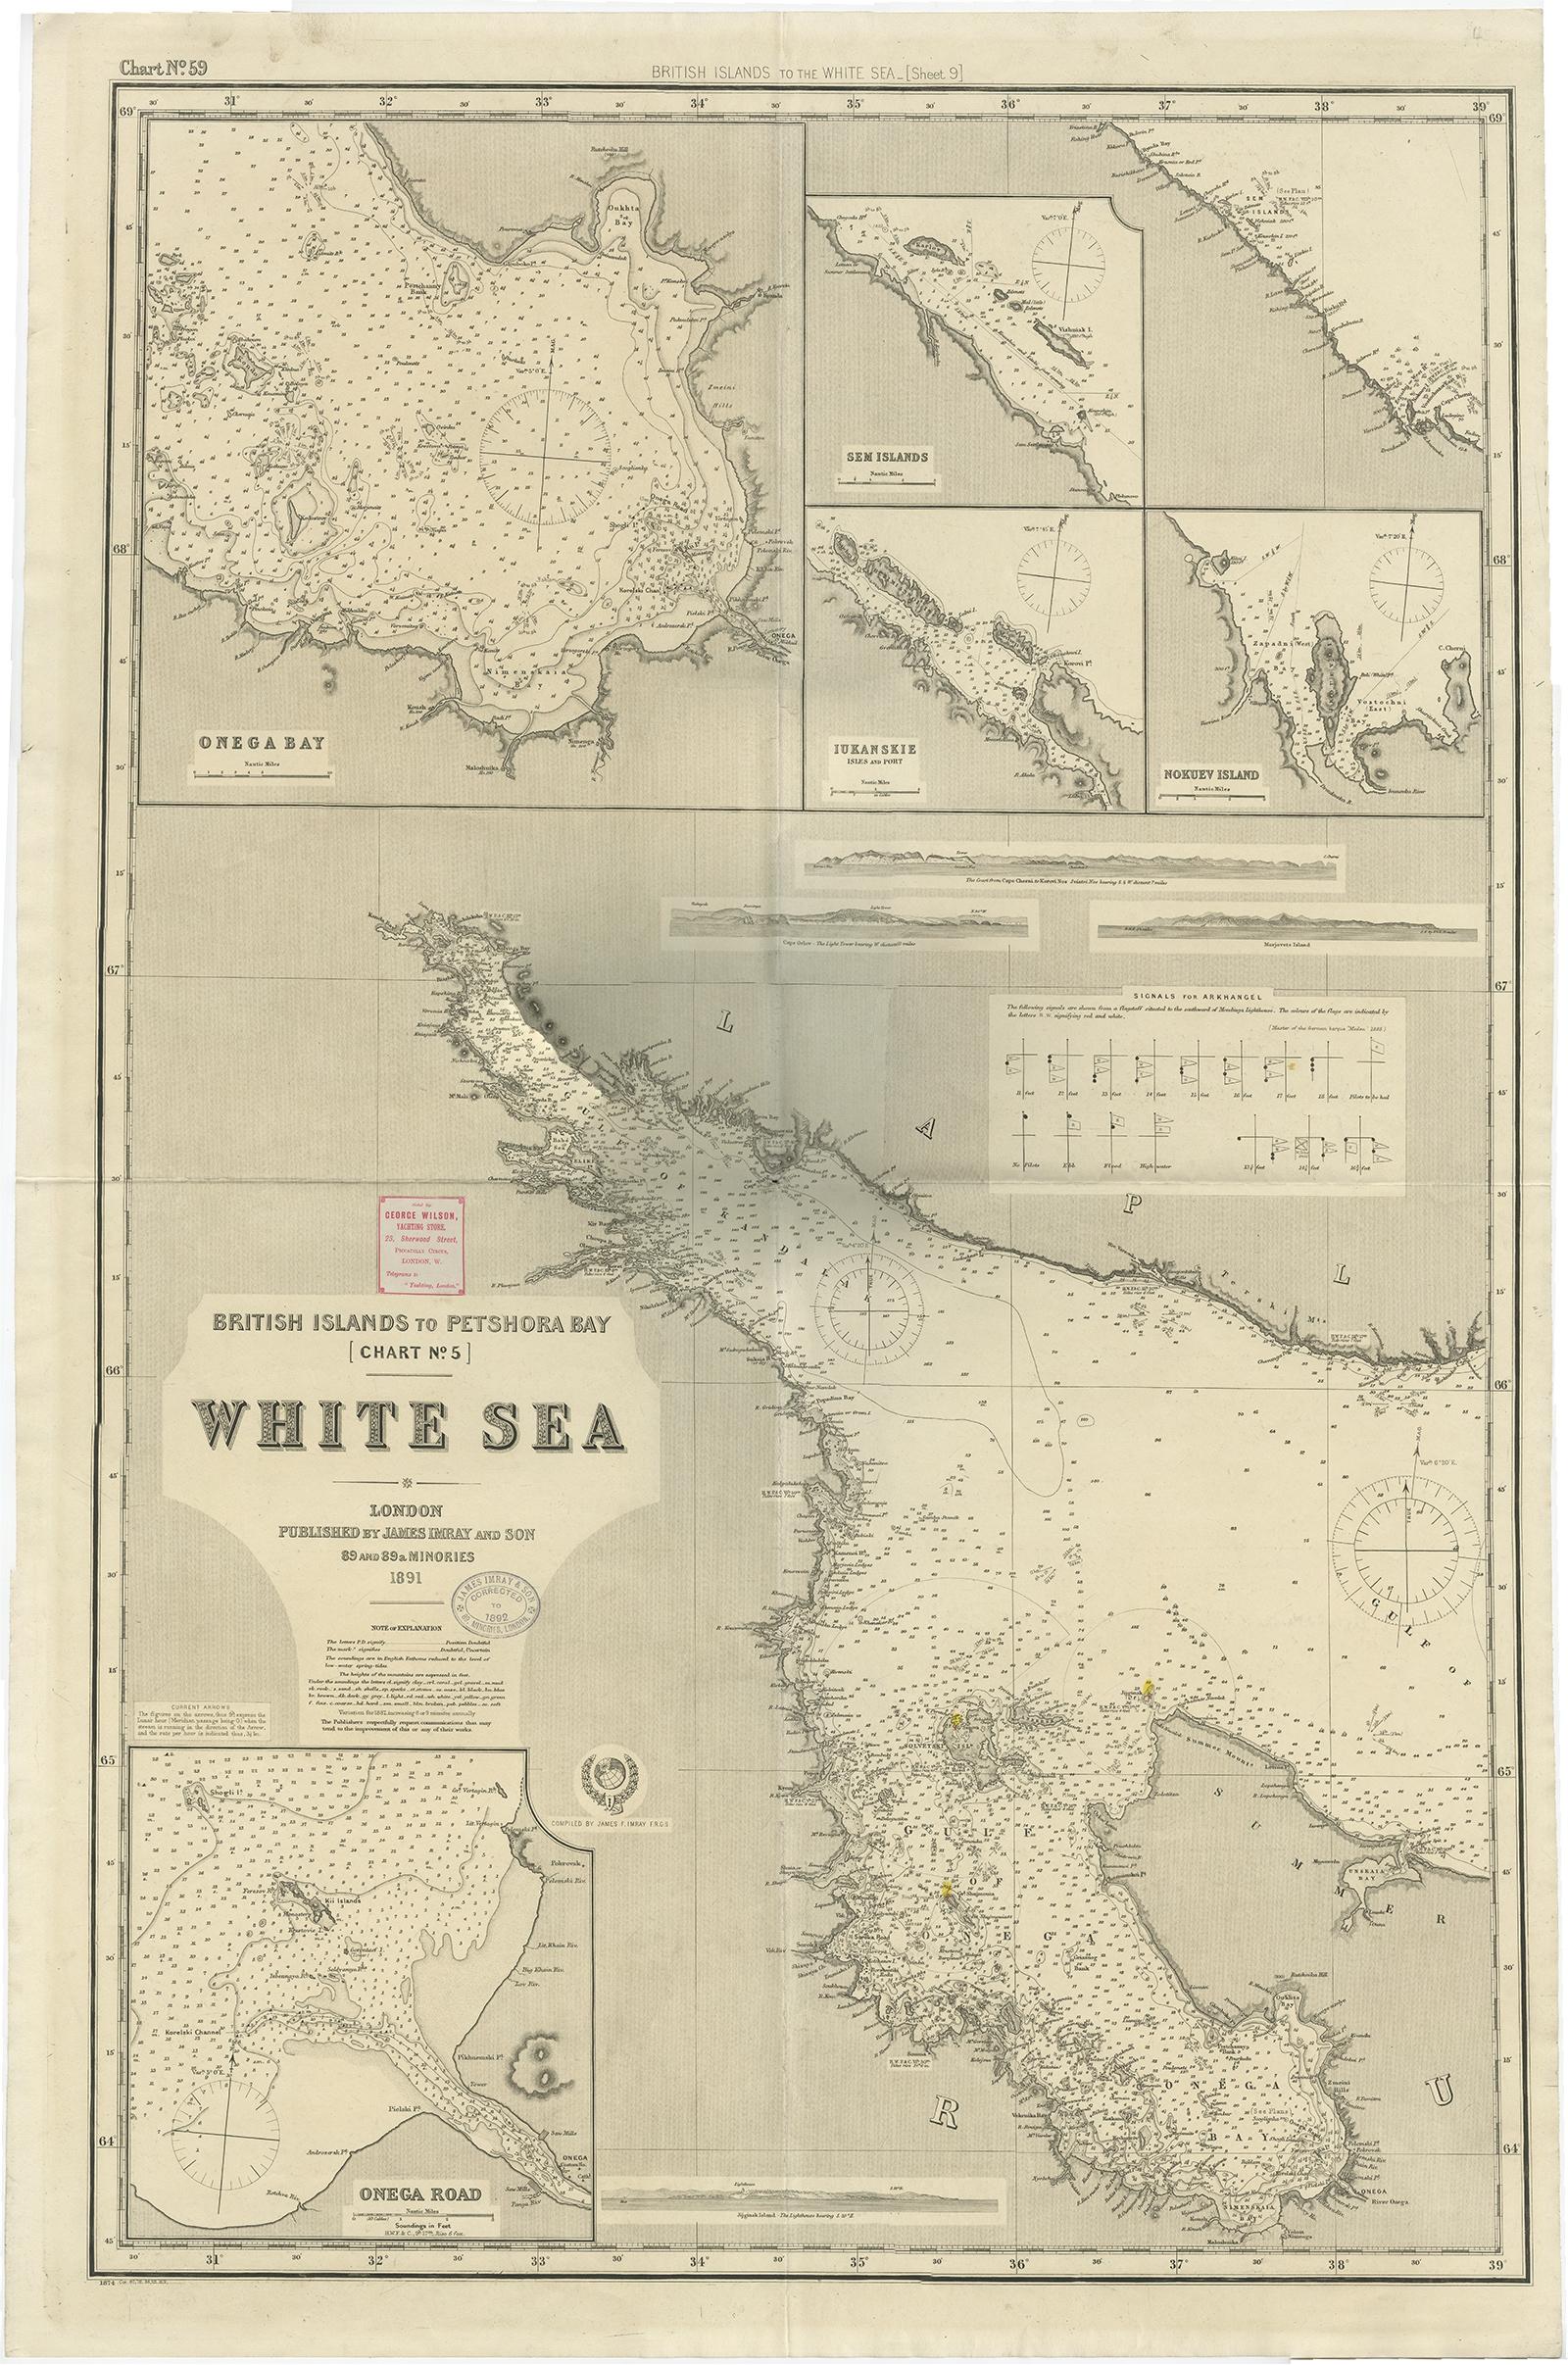 Antique map titled 'British Islands to Petshora Bay - White Sea'. Uncommon, large map of the British Islands to Petshora Bay. It shows the White Sea and inset maps of Onega Road, Onega Bay, Sem Islands, Iukanskie and Nokuev Island. 

Artists and